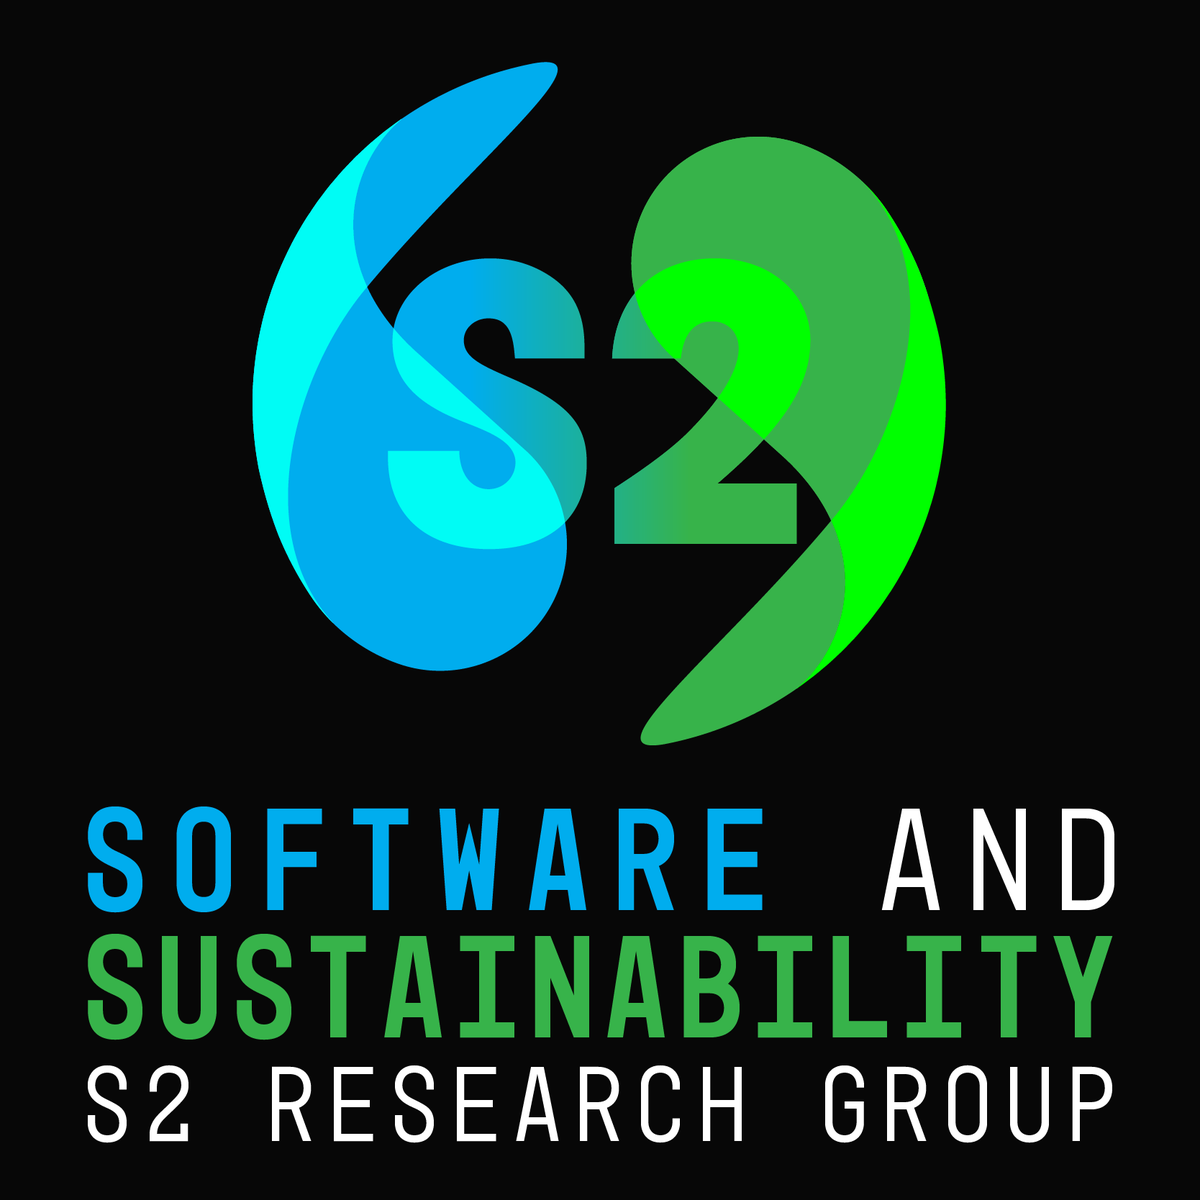 We are proud to share our new visual identity #s2group @VUamsterdam credits: #SimoneMarian